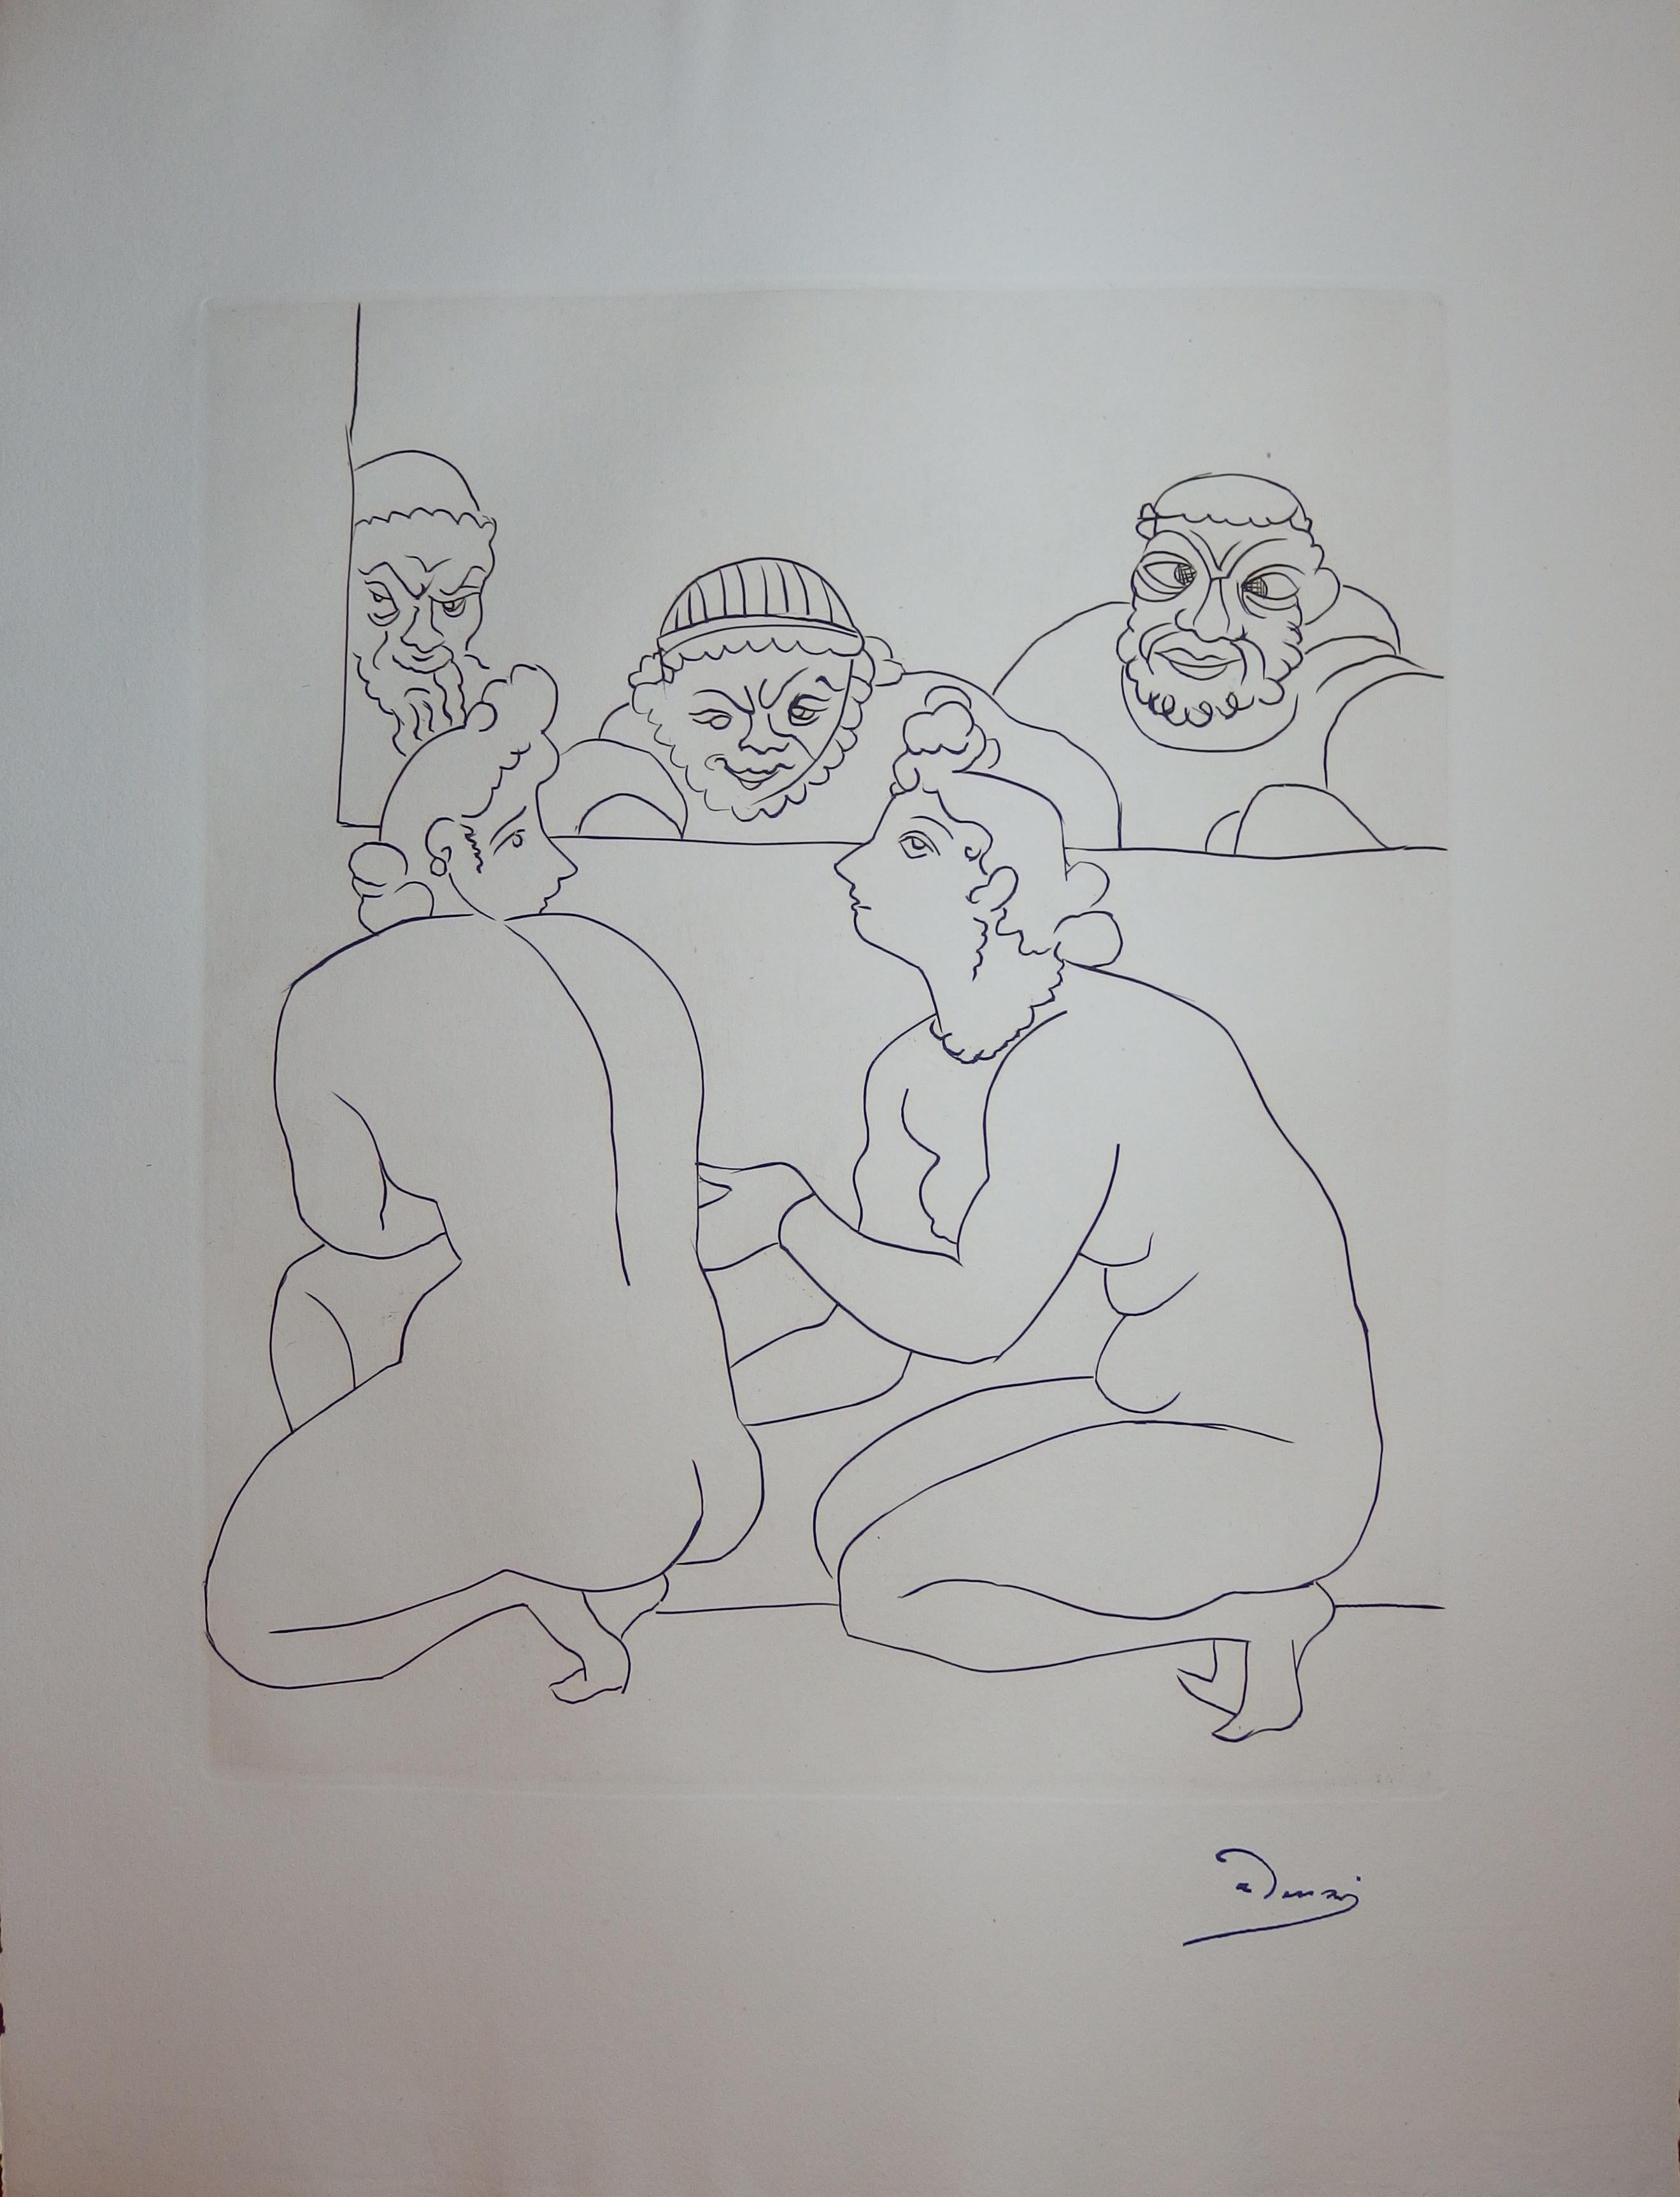 André Derain Nude Print - Two Nude Women Discussing with Men - Original etching - 1951